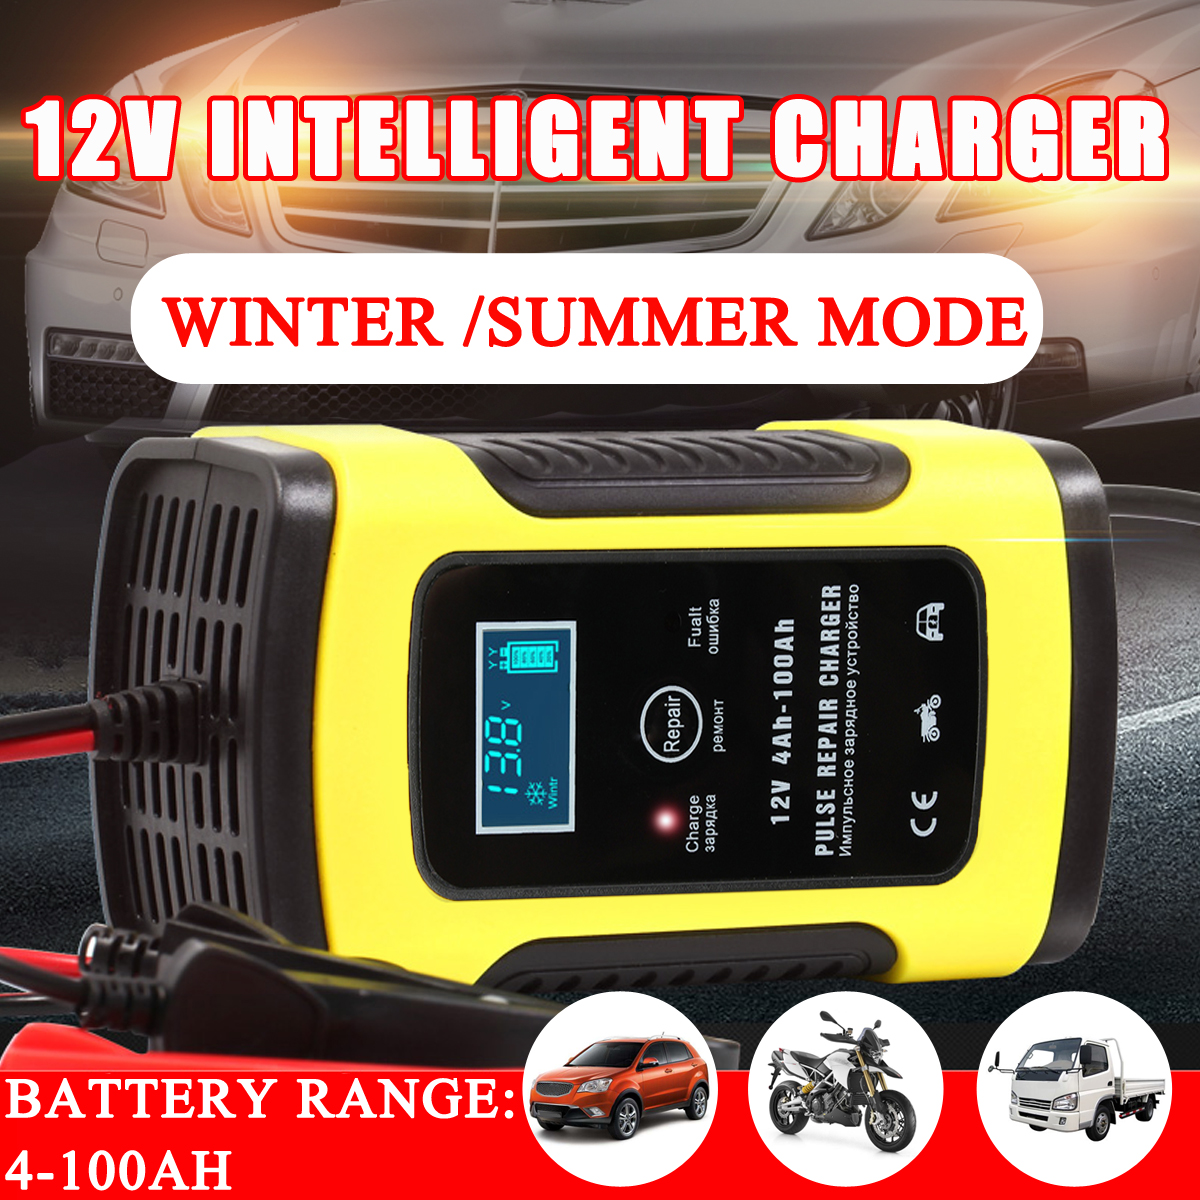 12V-5A-Pulse-Repair-Charger-with-LCD-Display-Battery-Charger-Lead-Acid-AGM-GEL-WET-Battery-Charger-1356466-1